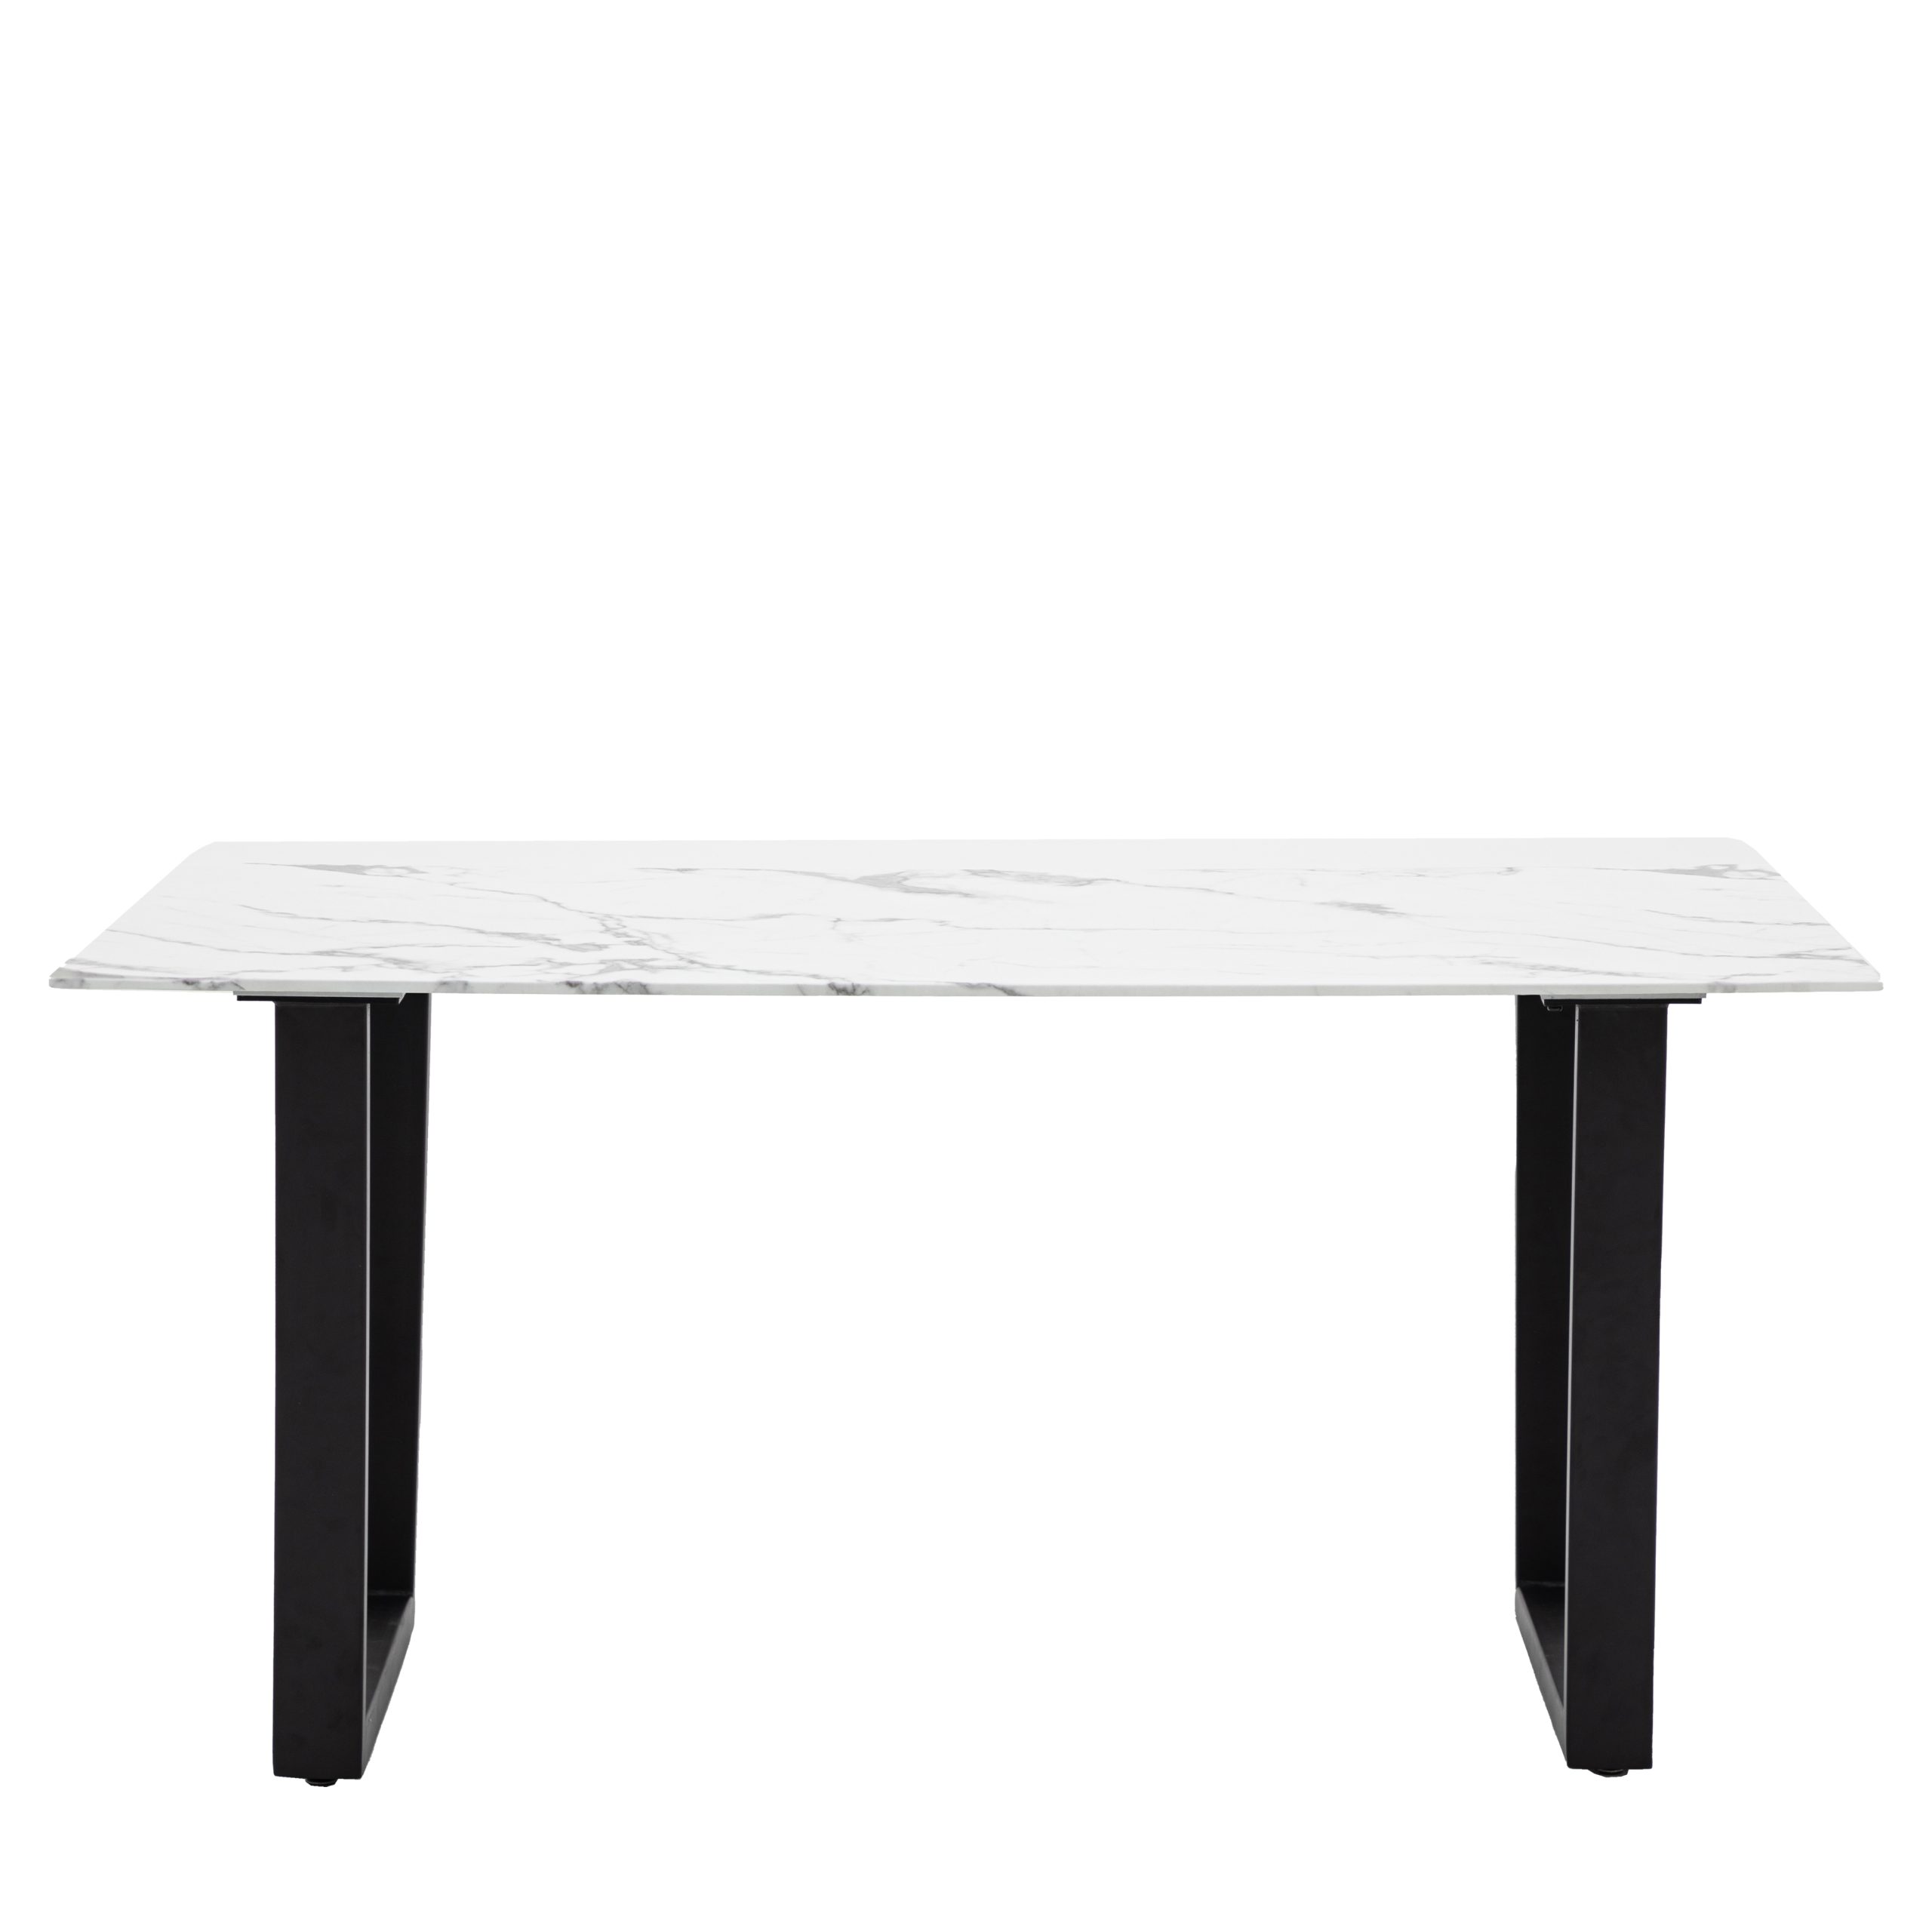 Gallery Direct Davidson Dining Table White Effect